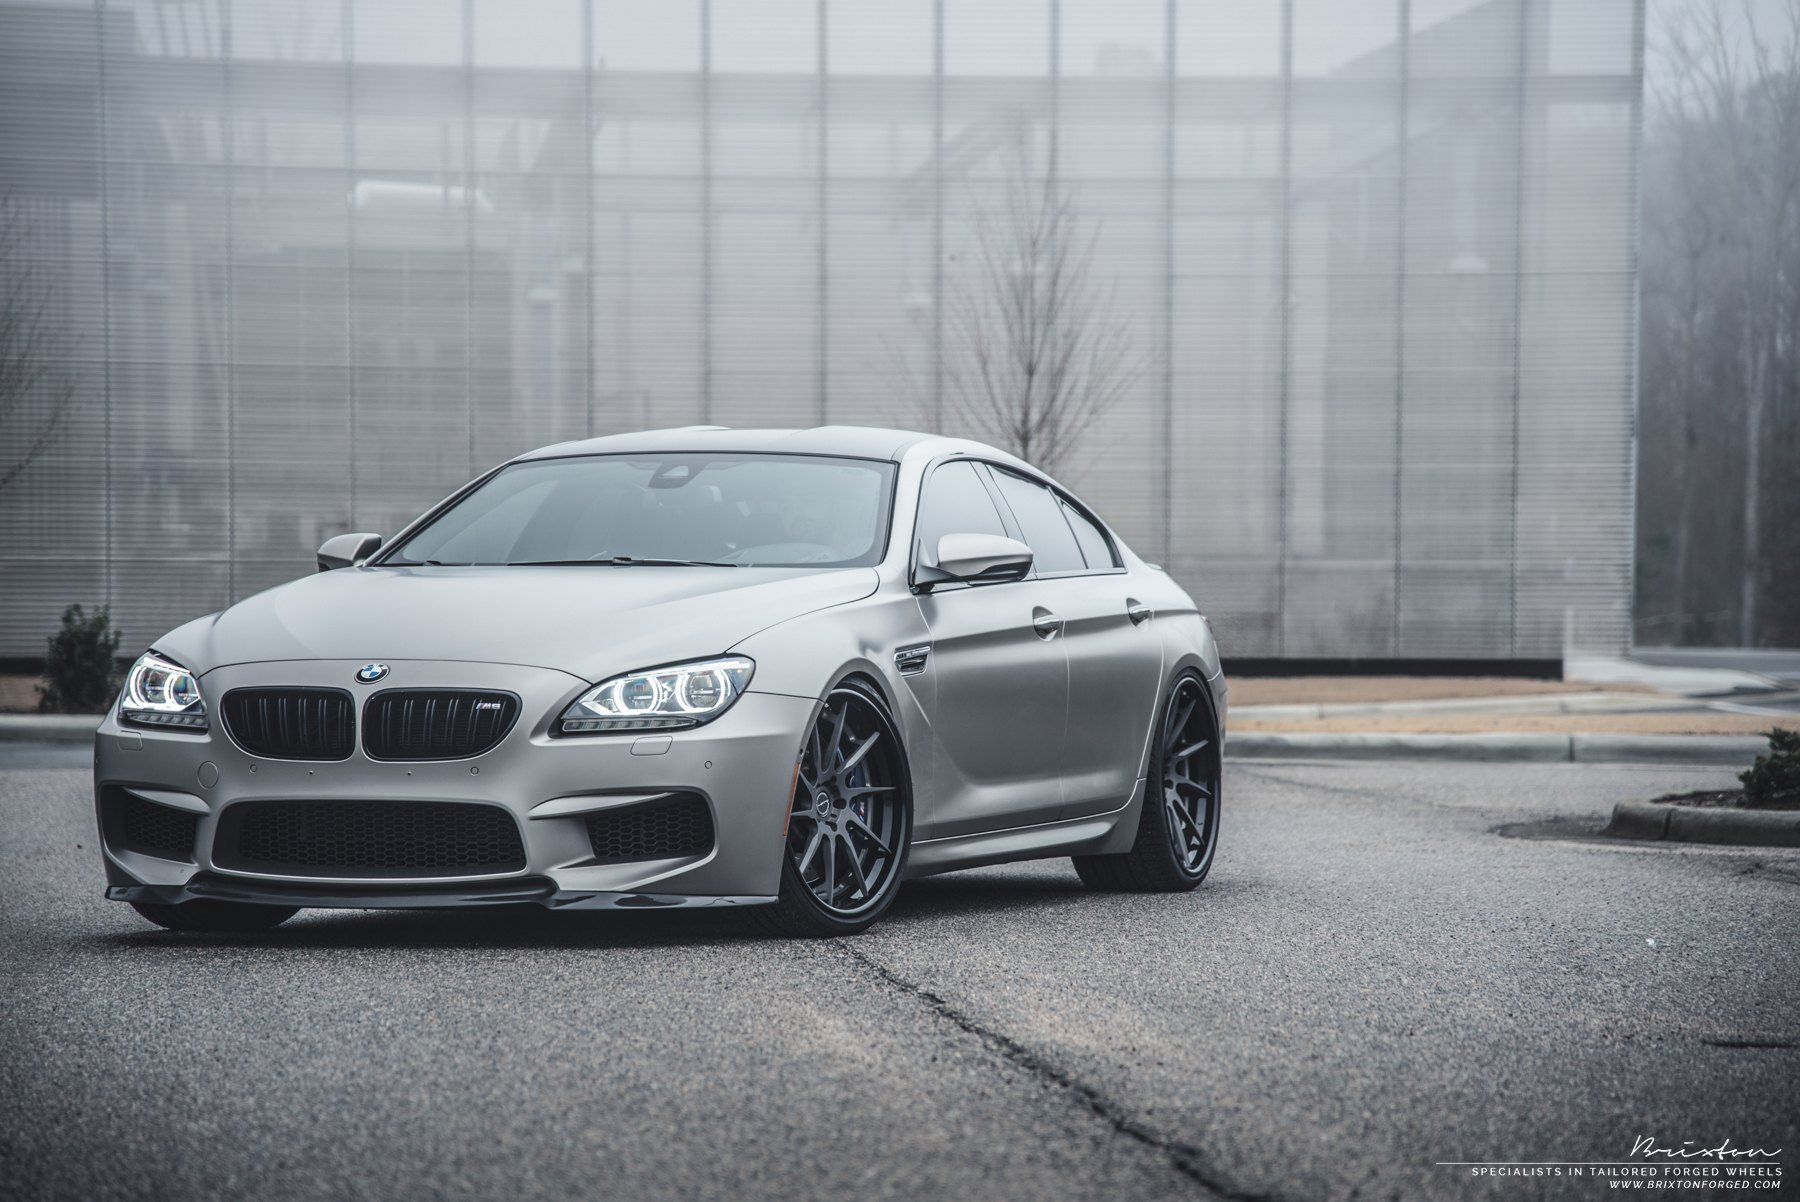 Aftermarket Front Bumper on Gray BMW 6-Series - Photo by Brixton Forged Wheels